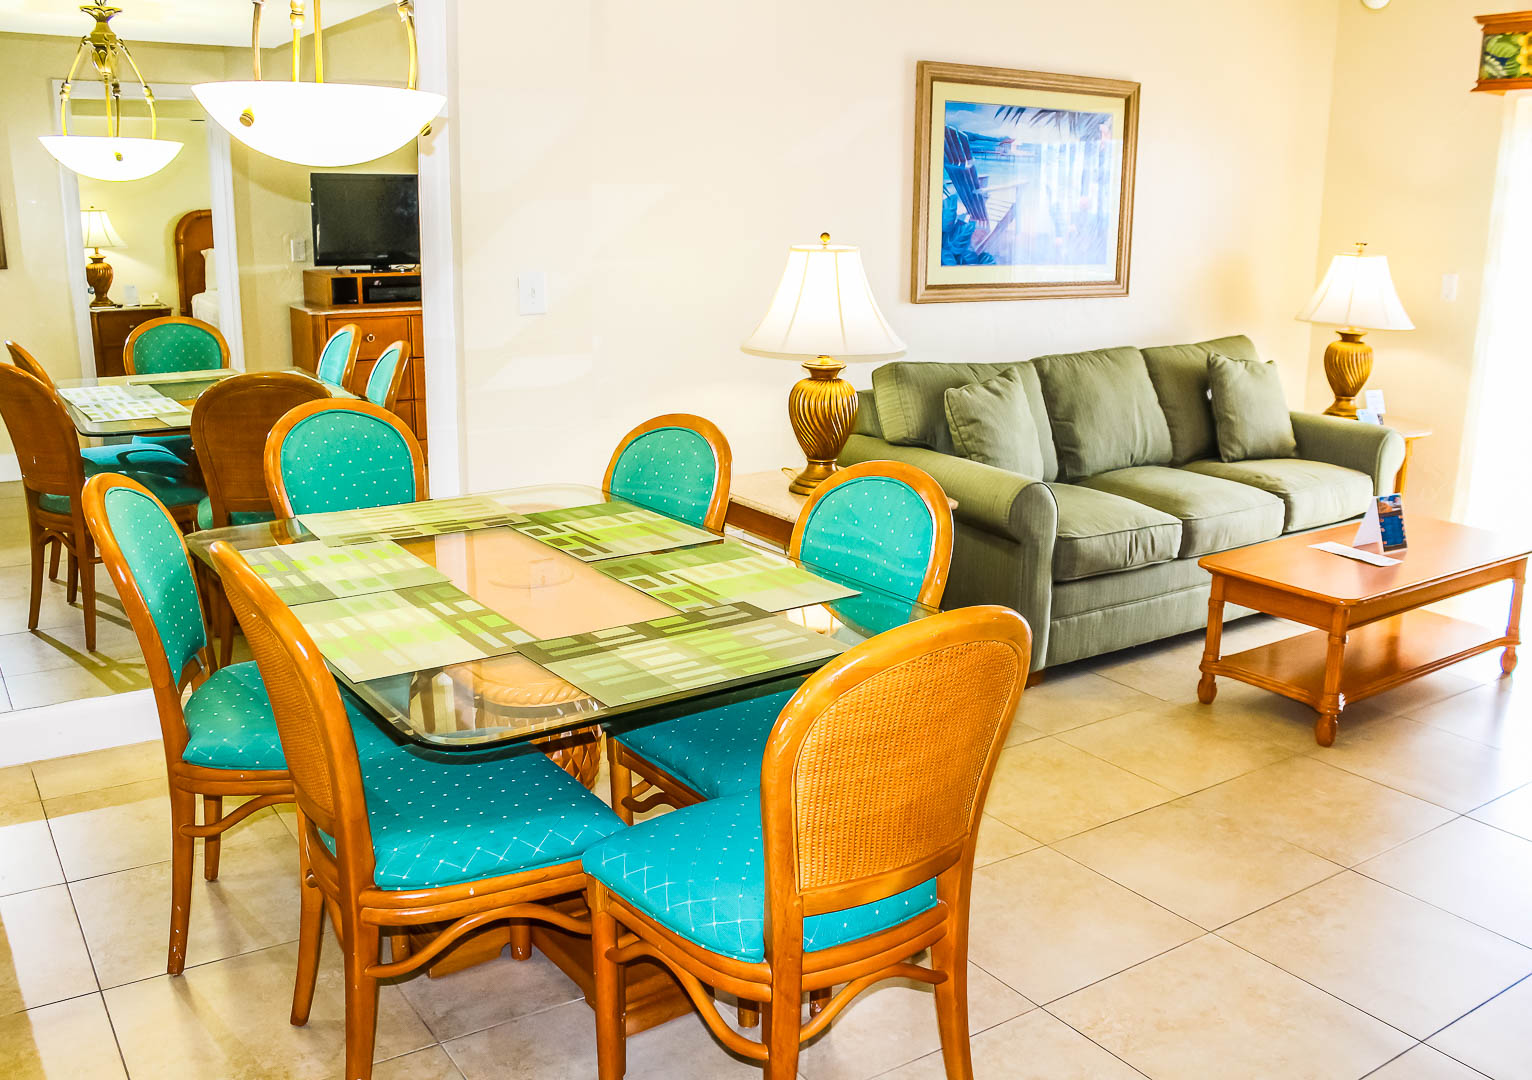 A vibrant living and dining area at VRI's Ft. Lauderdale Beach Resort in Florida.